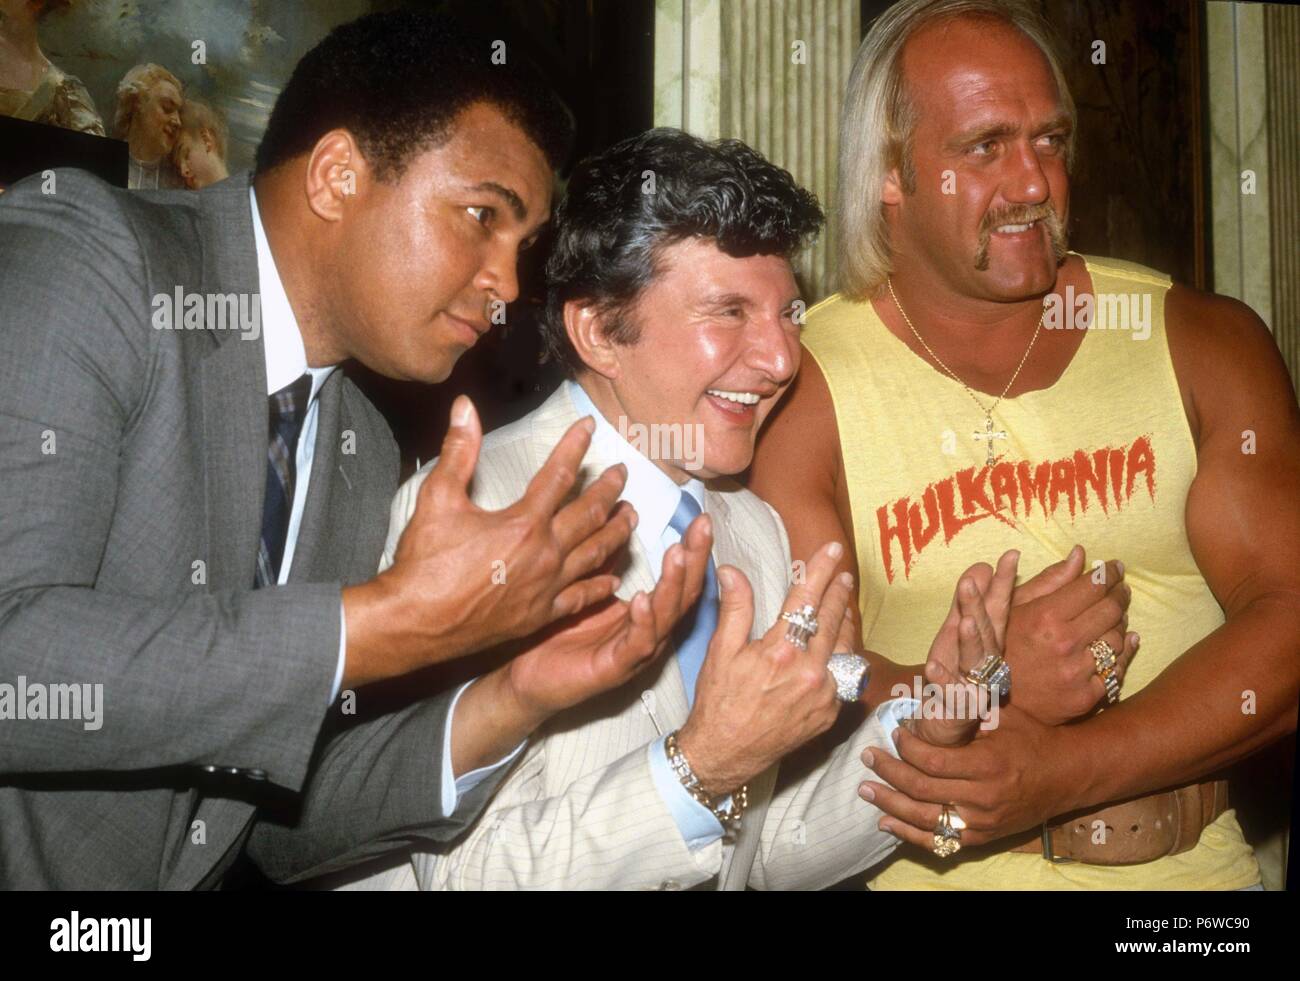 Muhammad Ali, Liberace and Hulk Hogan at Madison Square Garden during a  press conference for upcoming WrestleMania I on March 29, 1985. Photo By  Adam Scull/PHOTOlink.net/MediaPunch Stock Photo - Alamy